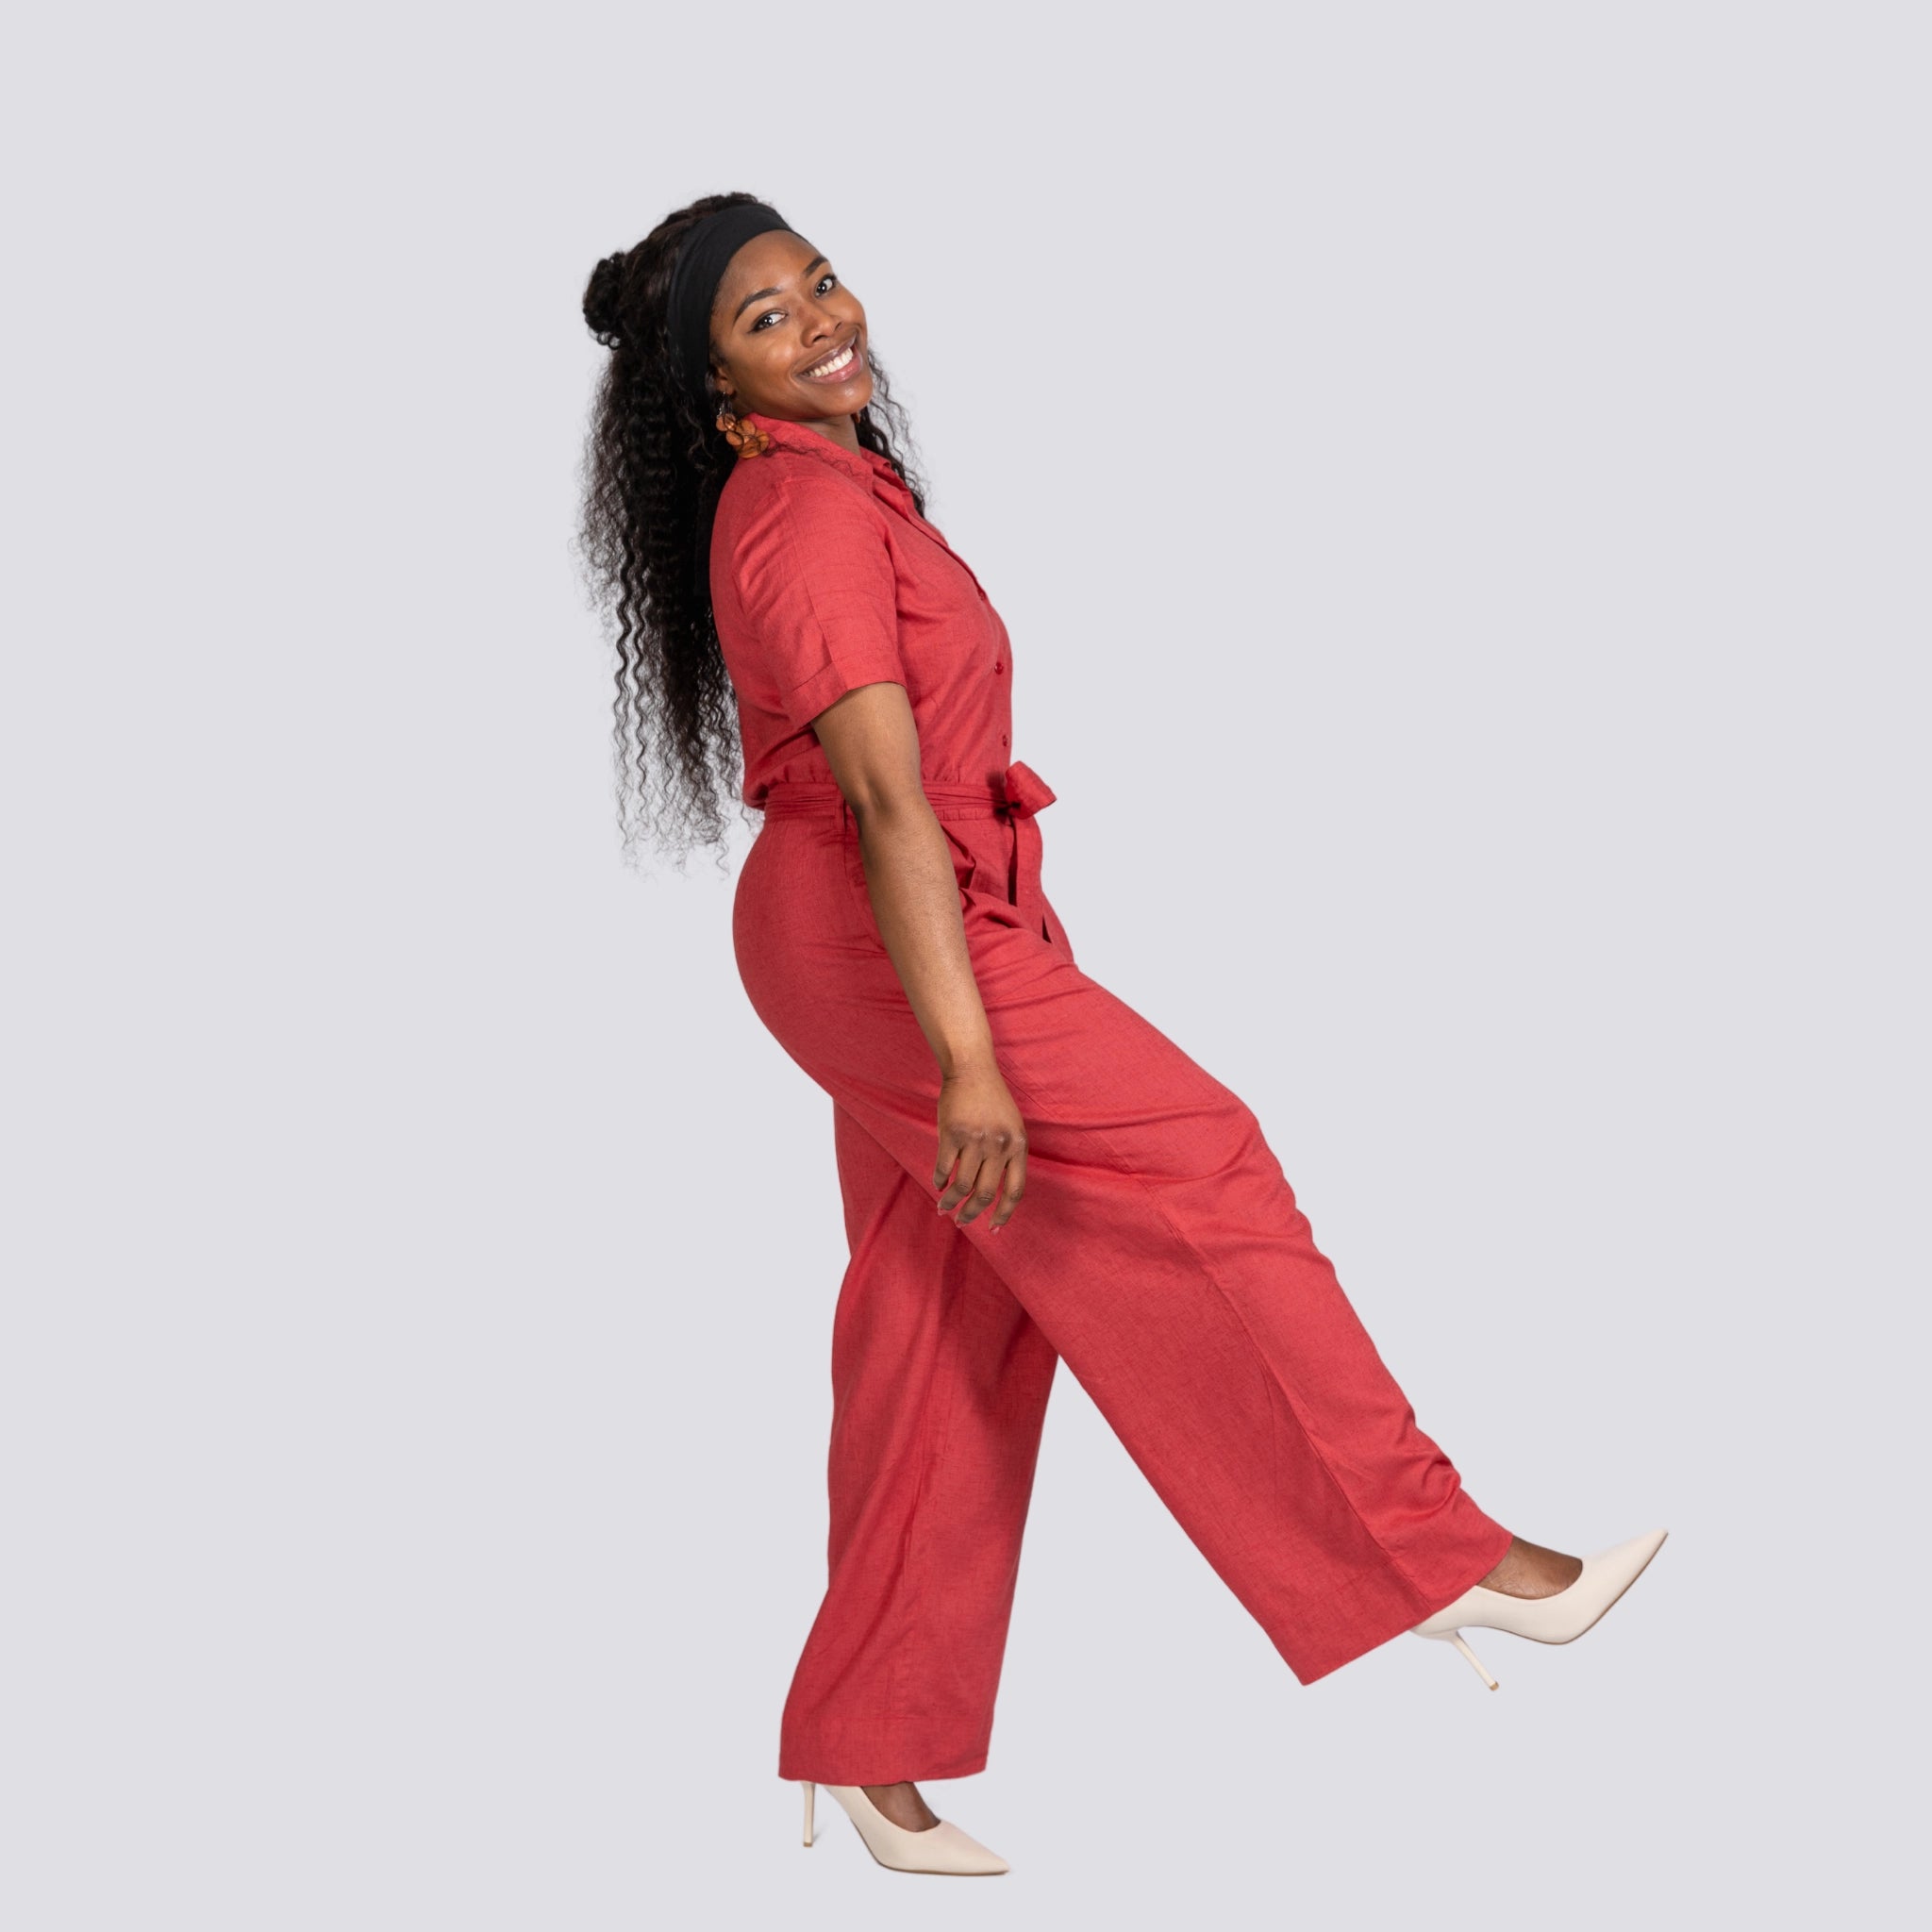 A woman in a Karee Milano Red Serenity Viscose Linen Jumpsuit and white heels smiling and posing playfully against a gray background.